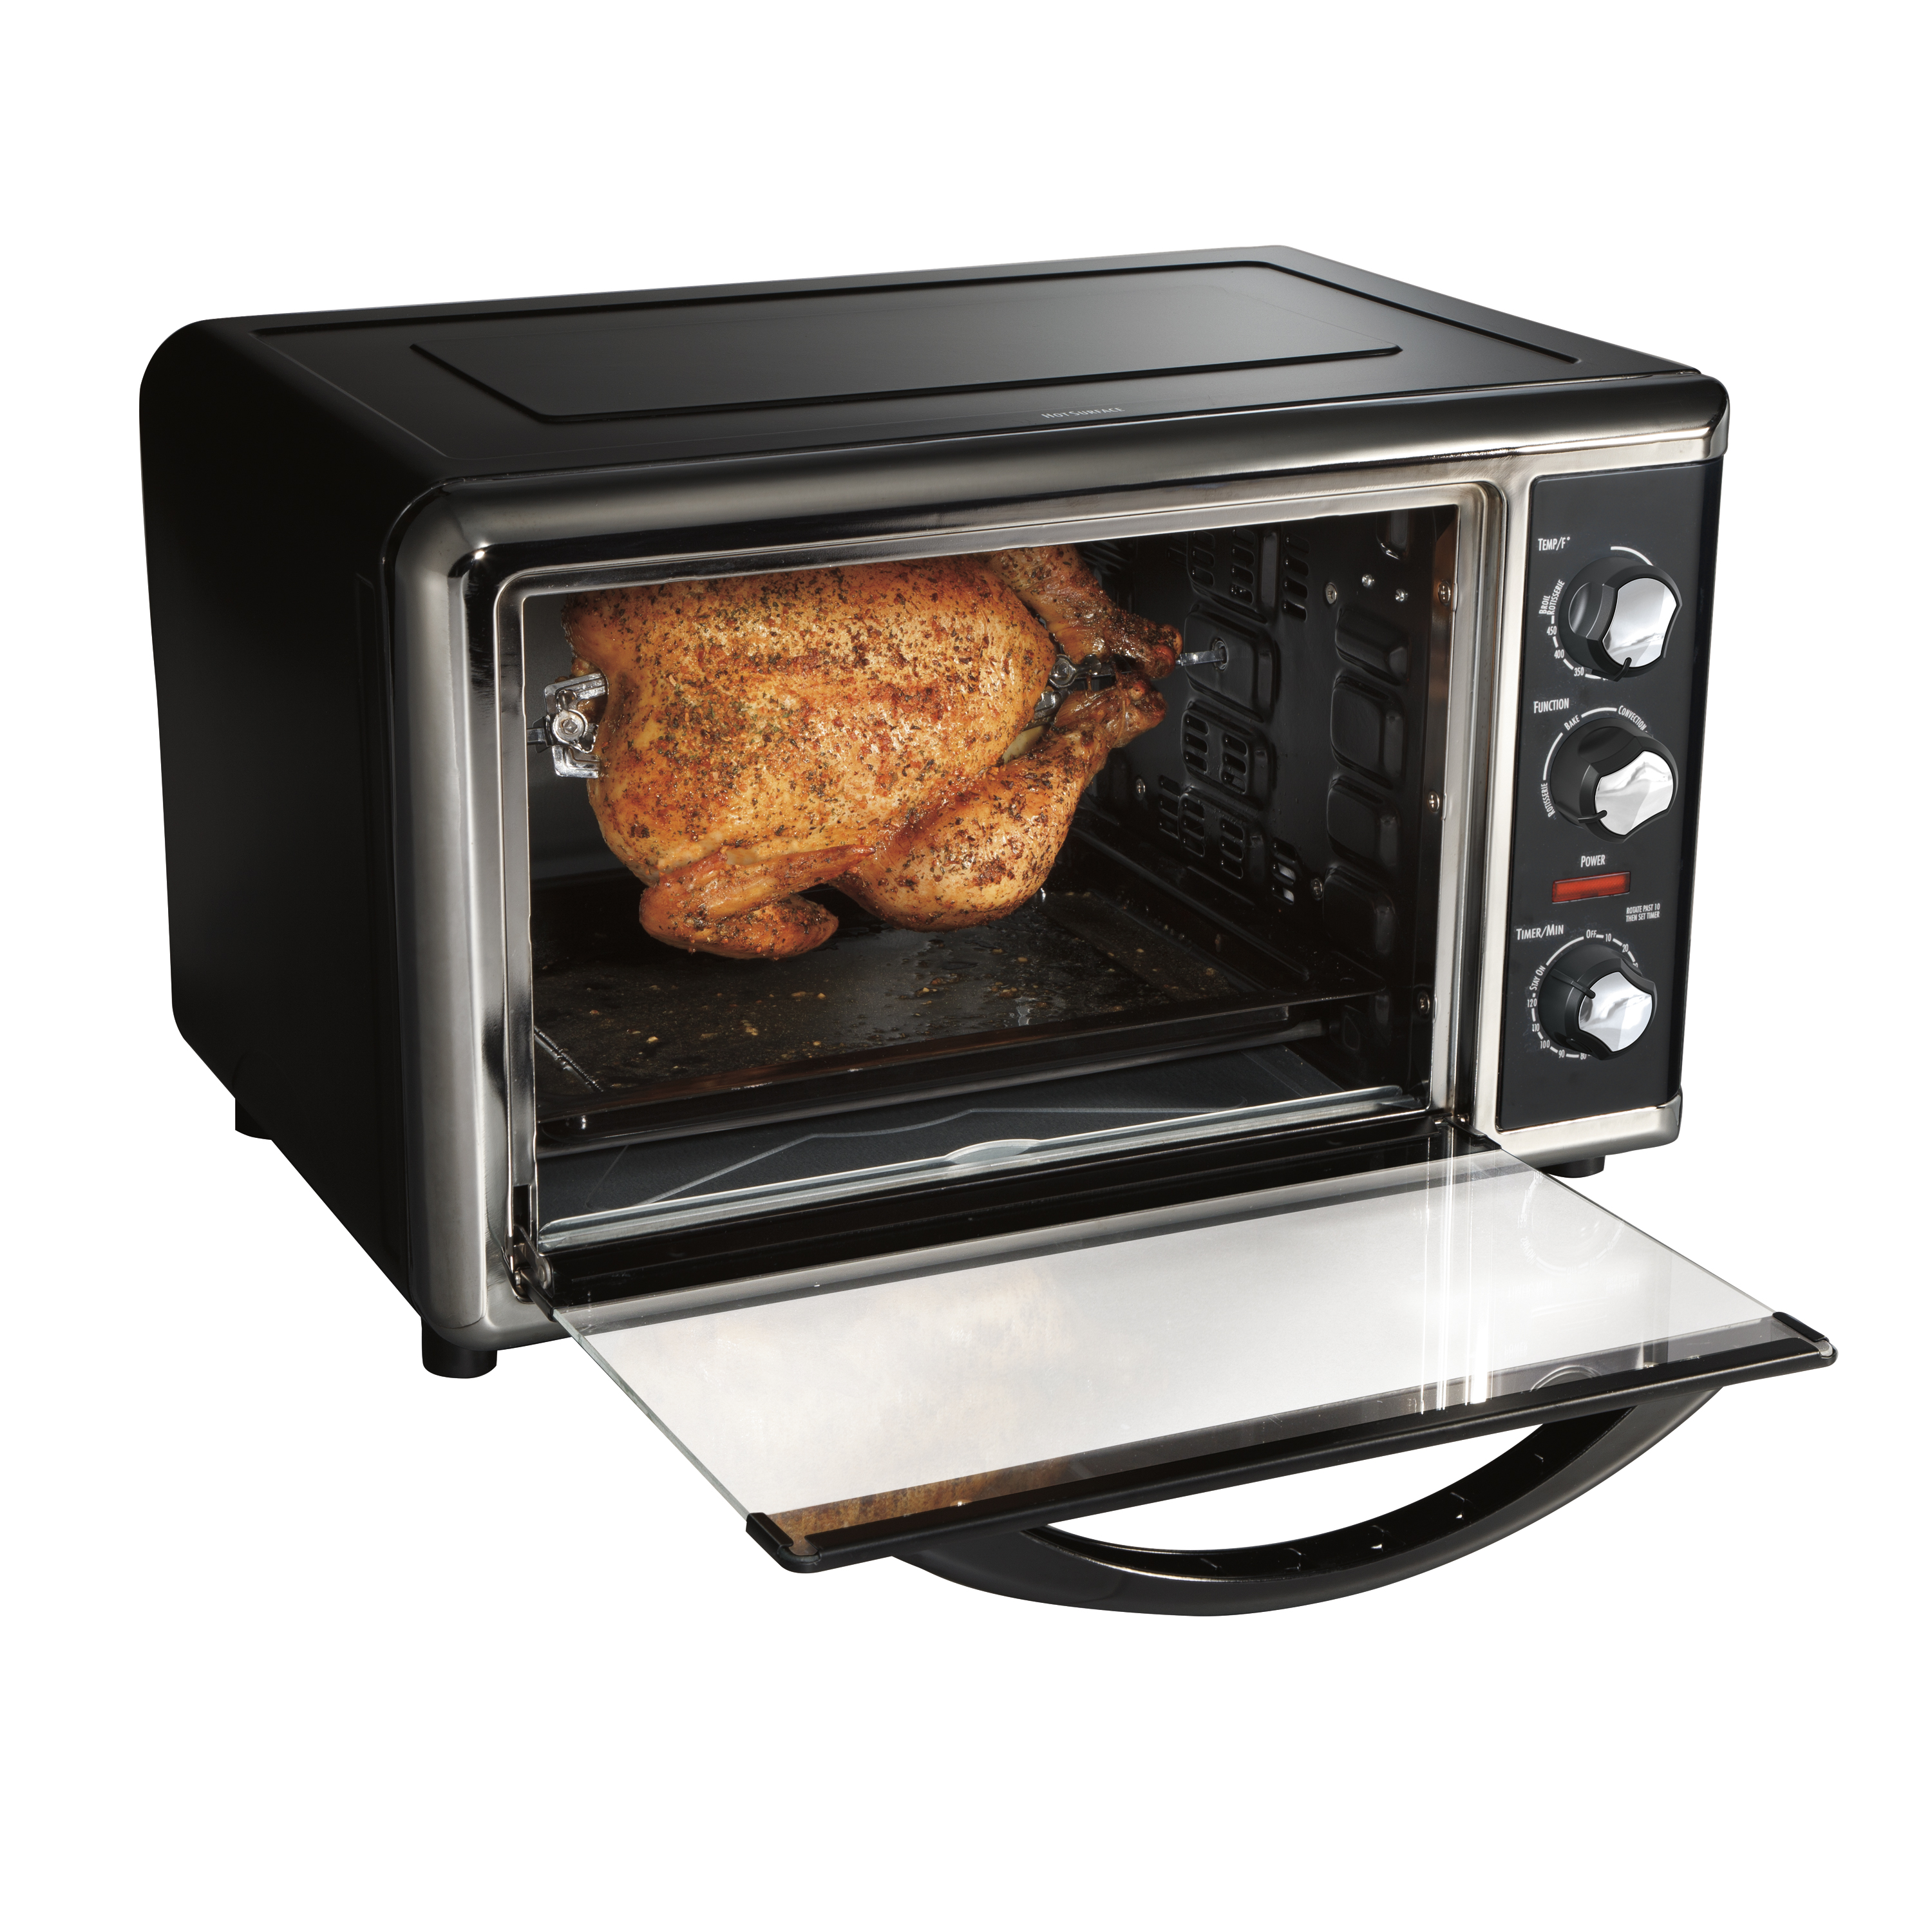 Hamilton Beach Countertop Oven with Convection and Rotisserie, Baking, Broil, Extra Large Capacity, Silver, 31100D - image 5 of 9